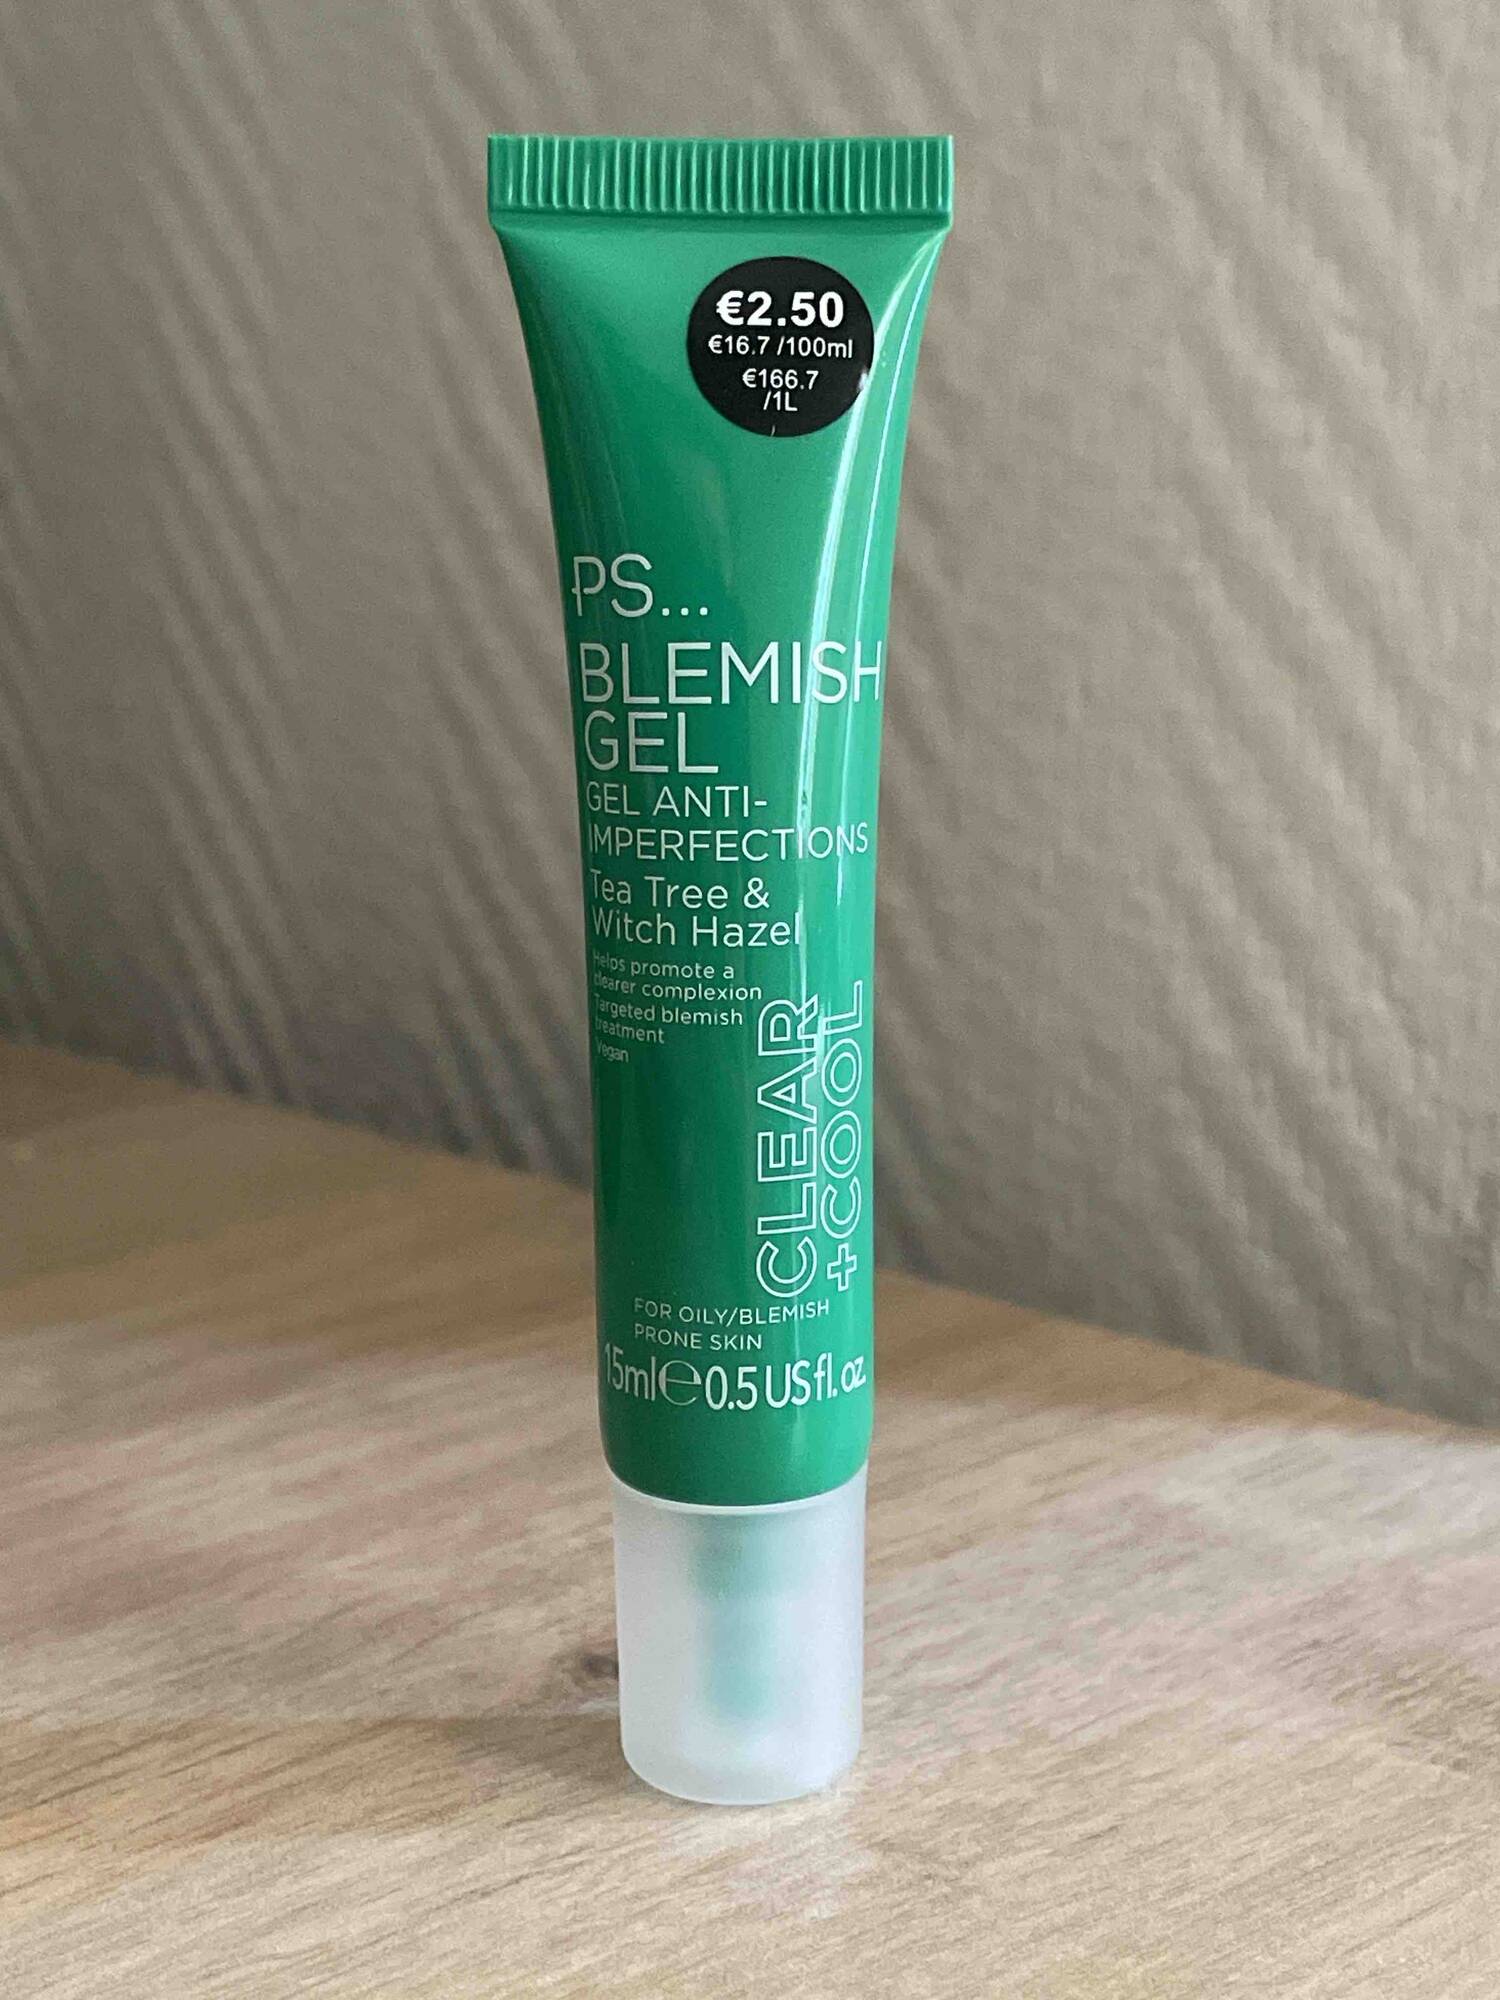 PRIMARK - PS Clear + cool - Gel anti-imperfections